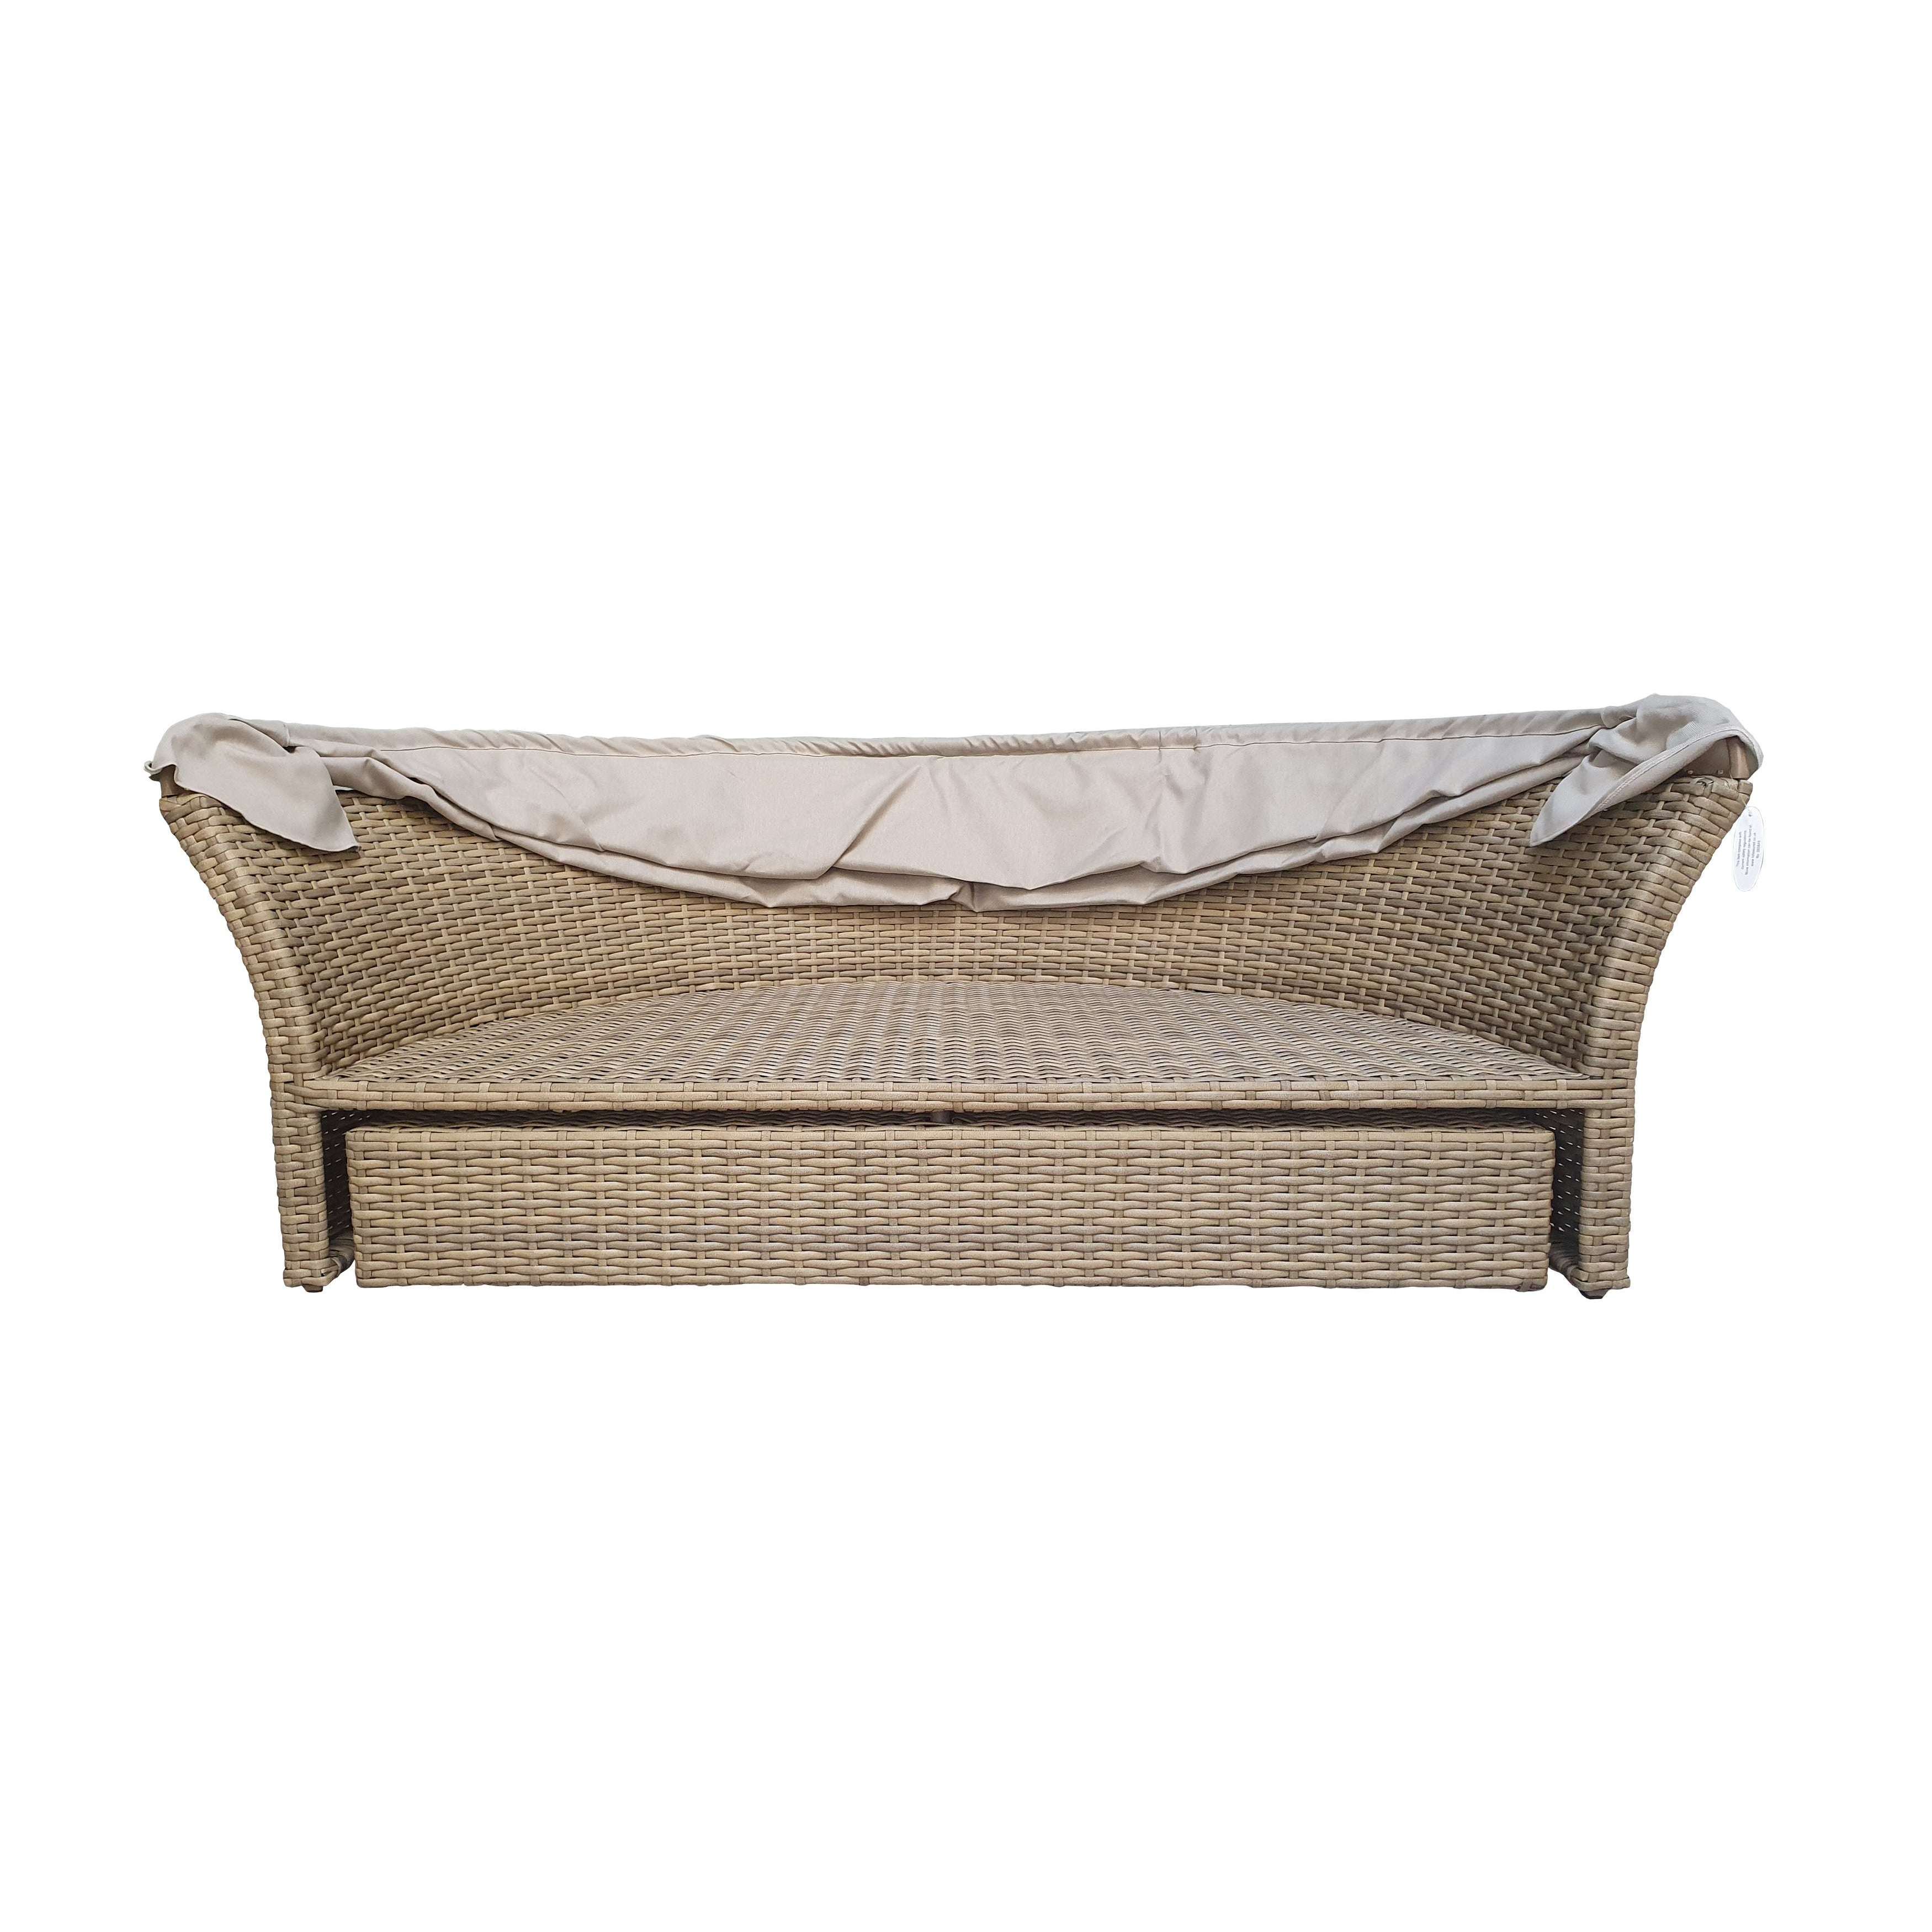 Exceptional Garden:Signature Weave Lilly Daybed - Nature